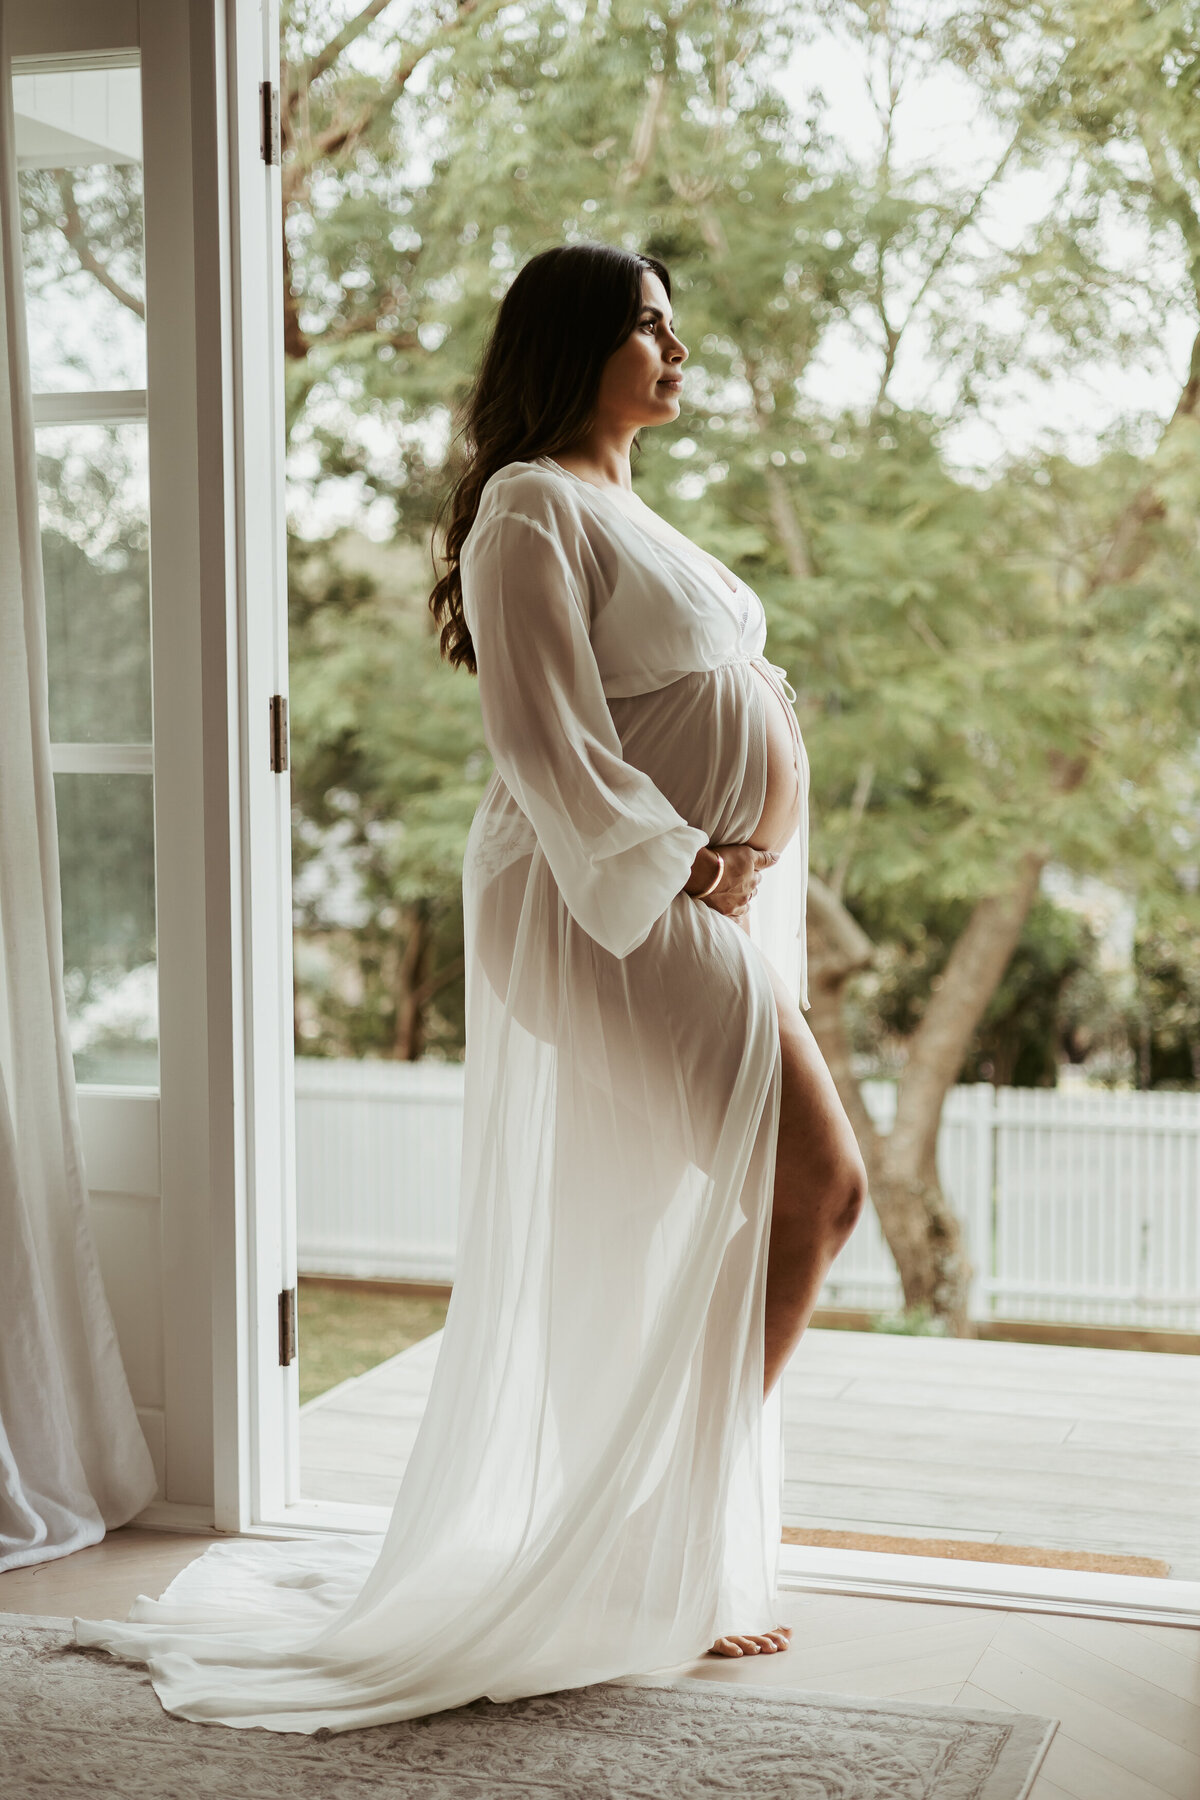 Pregnant woman in white see-thorough robe posing in doorway of French doors